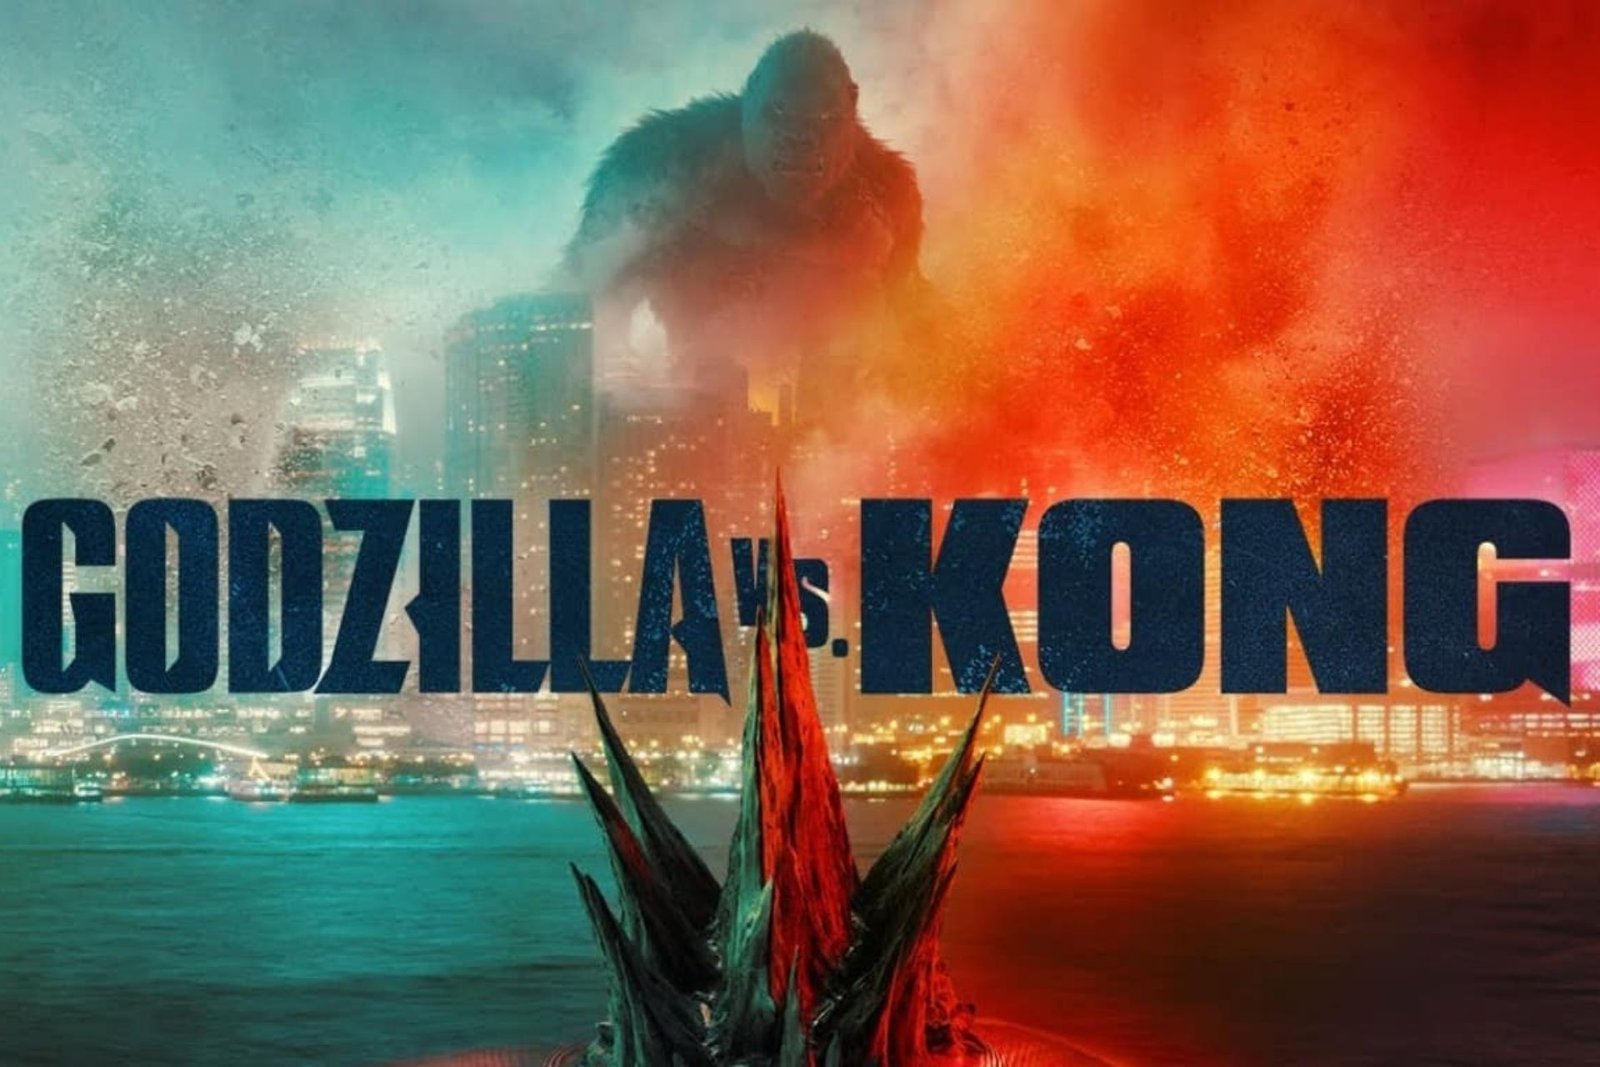 Godzilla vs Kong Will Be Available On Prime On August 14th